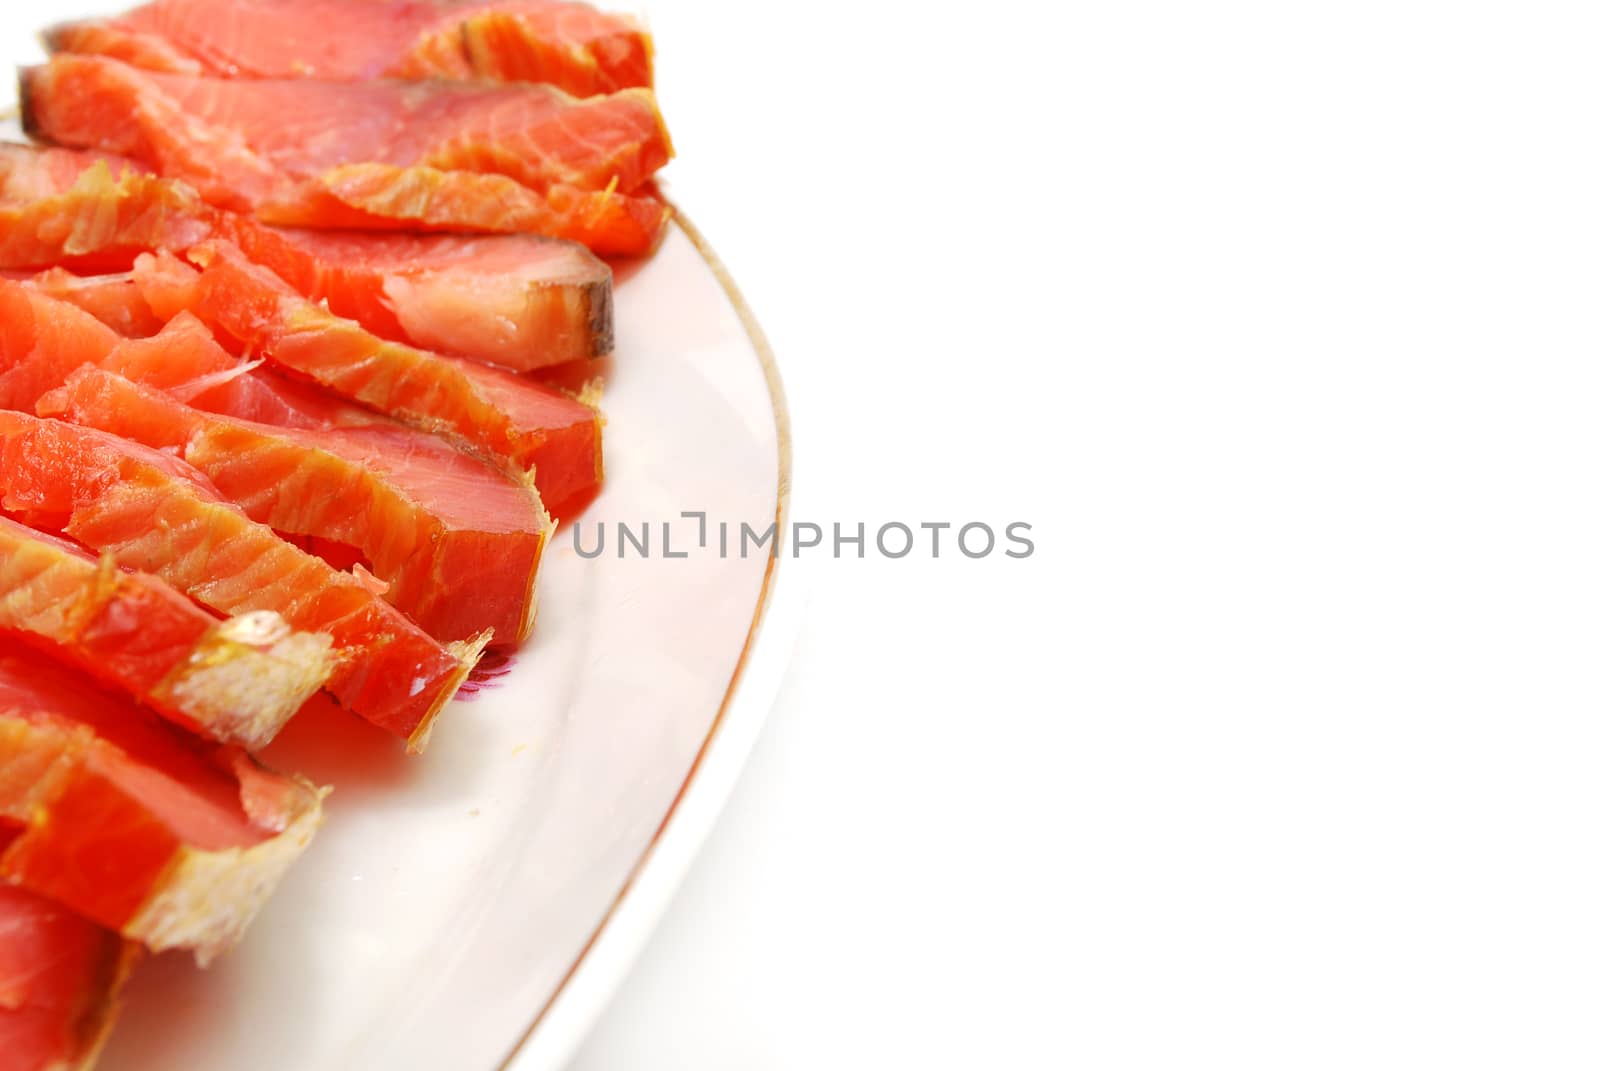 Dish of Pieces of Red Fish Slices Closeup to Ornate Corner (to use as Background)